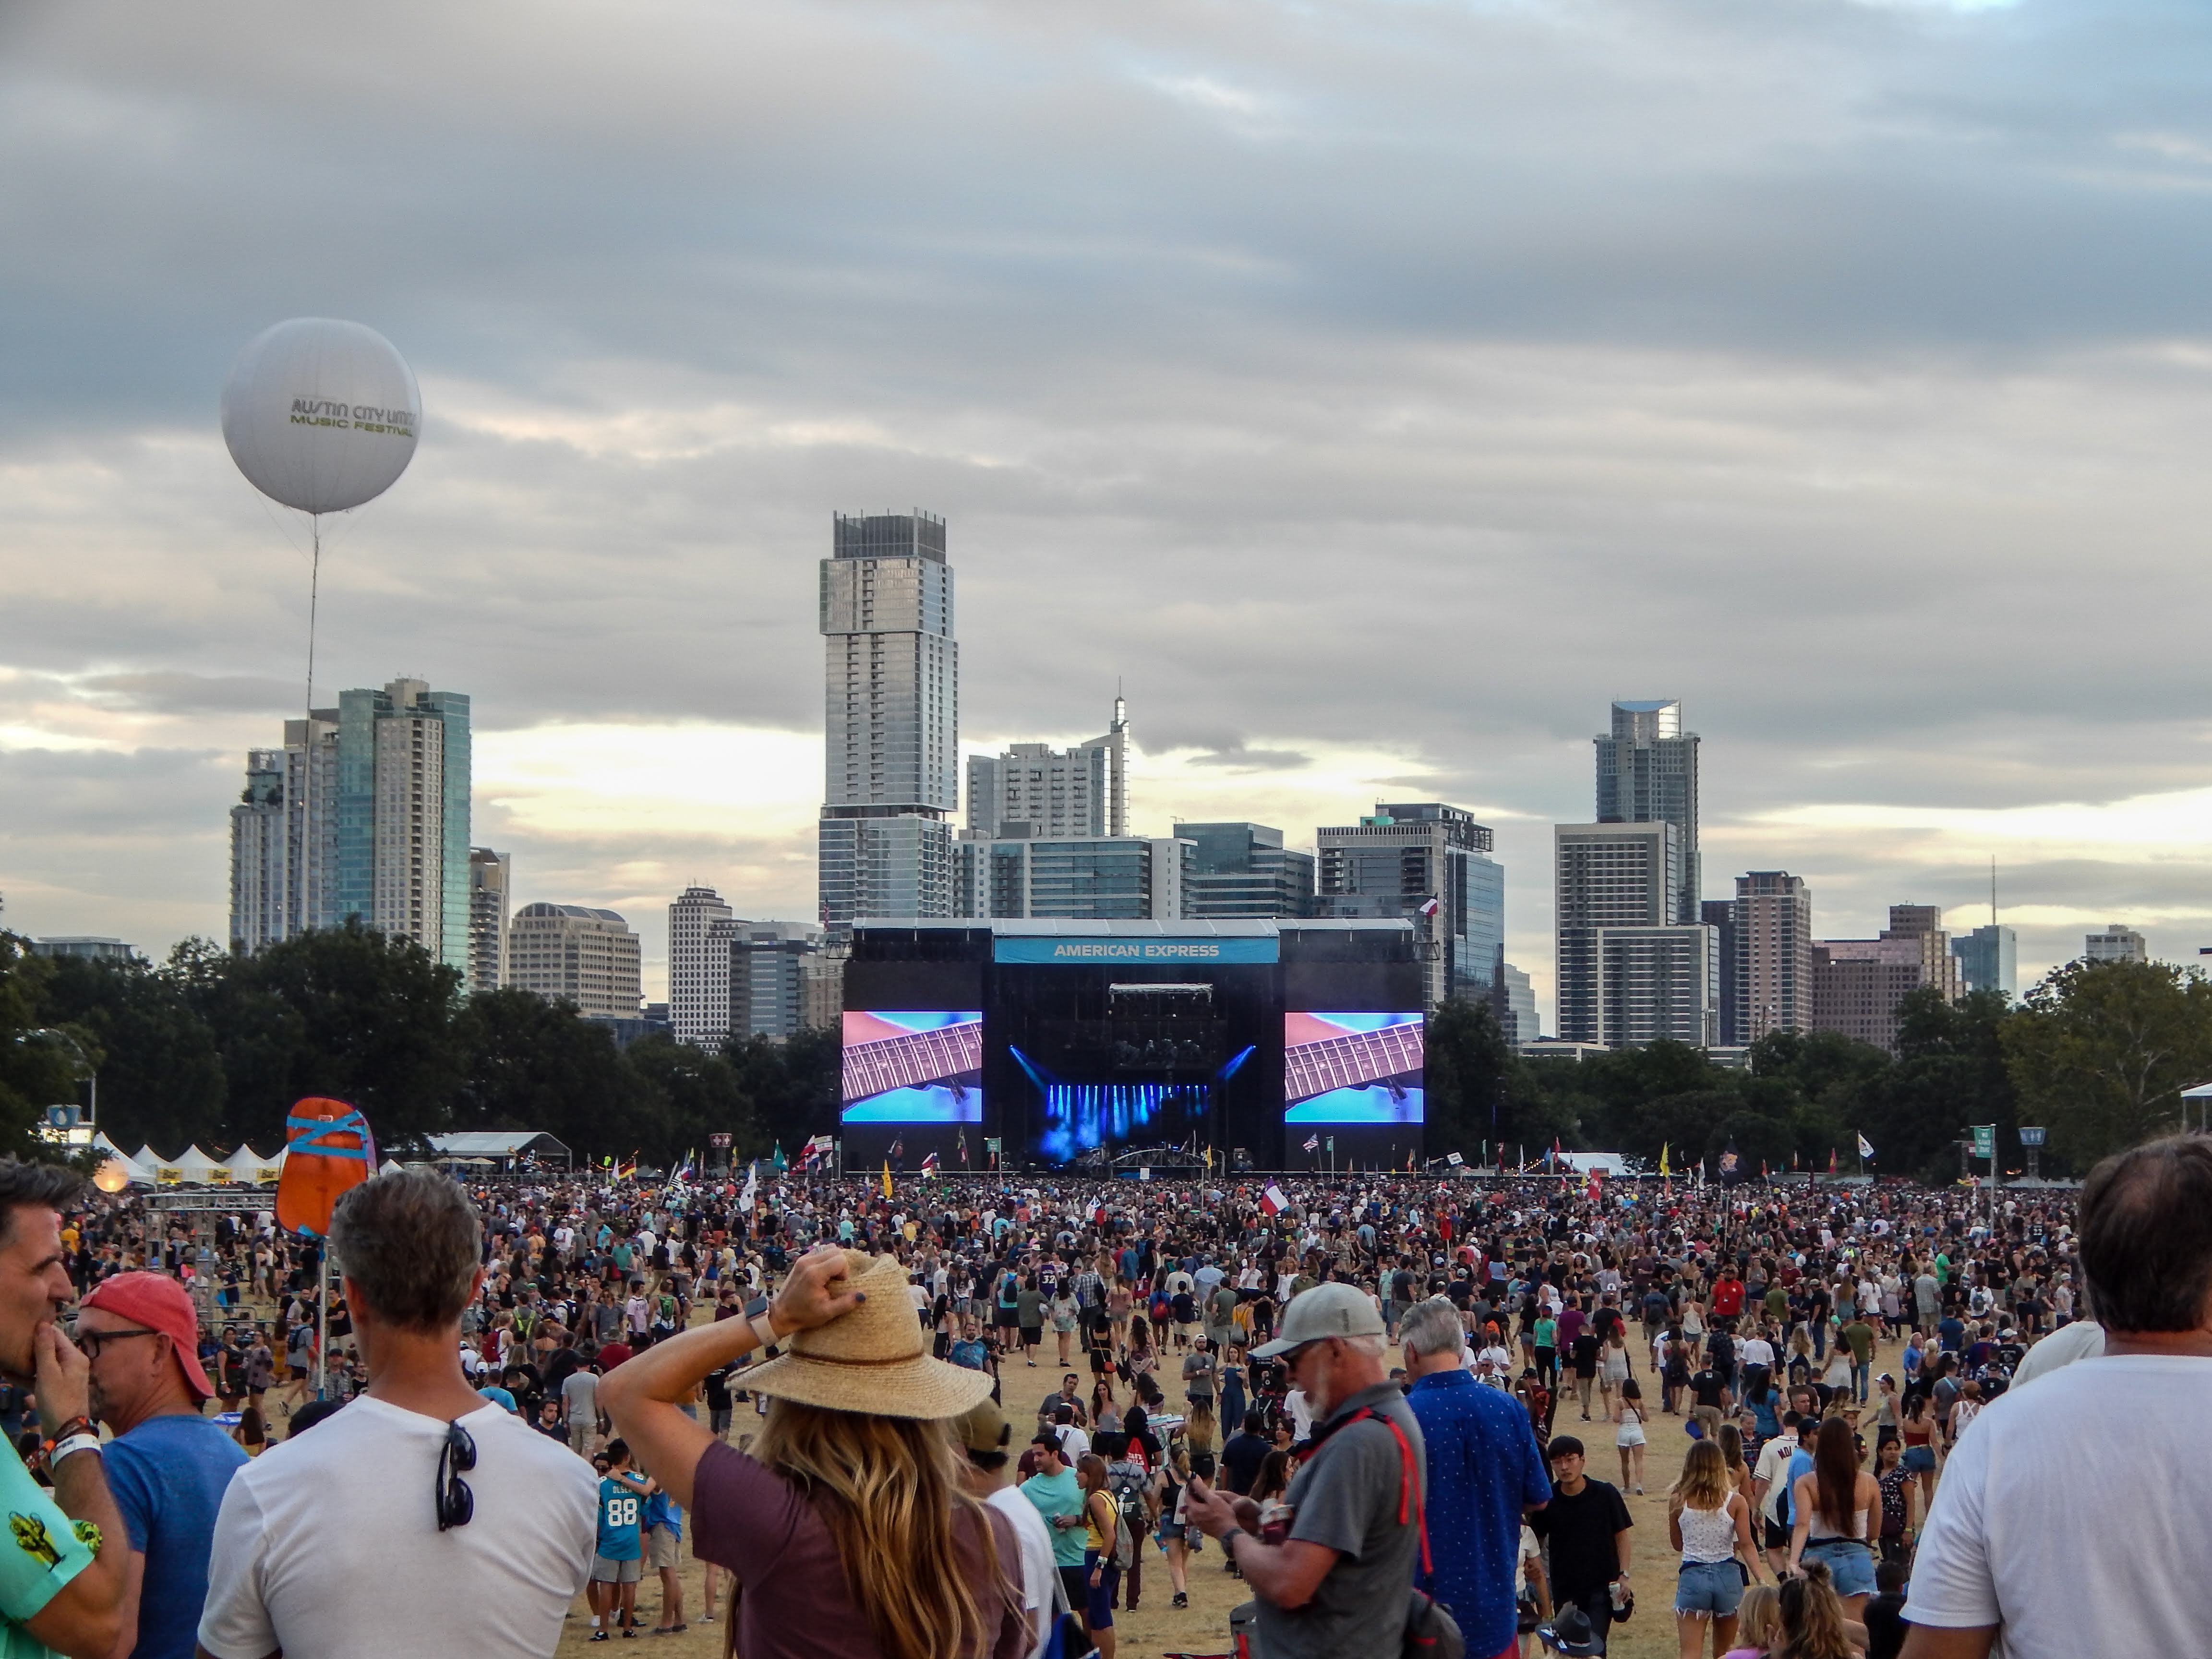 Thousands of people make their way to the biggest stage at Austin City Limits. You can see the Austin skyline behind the stage.